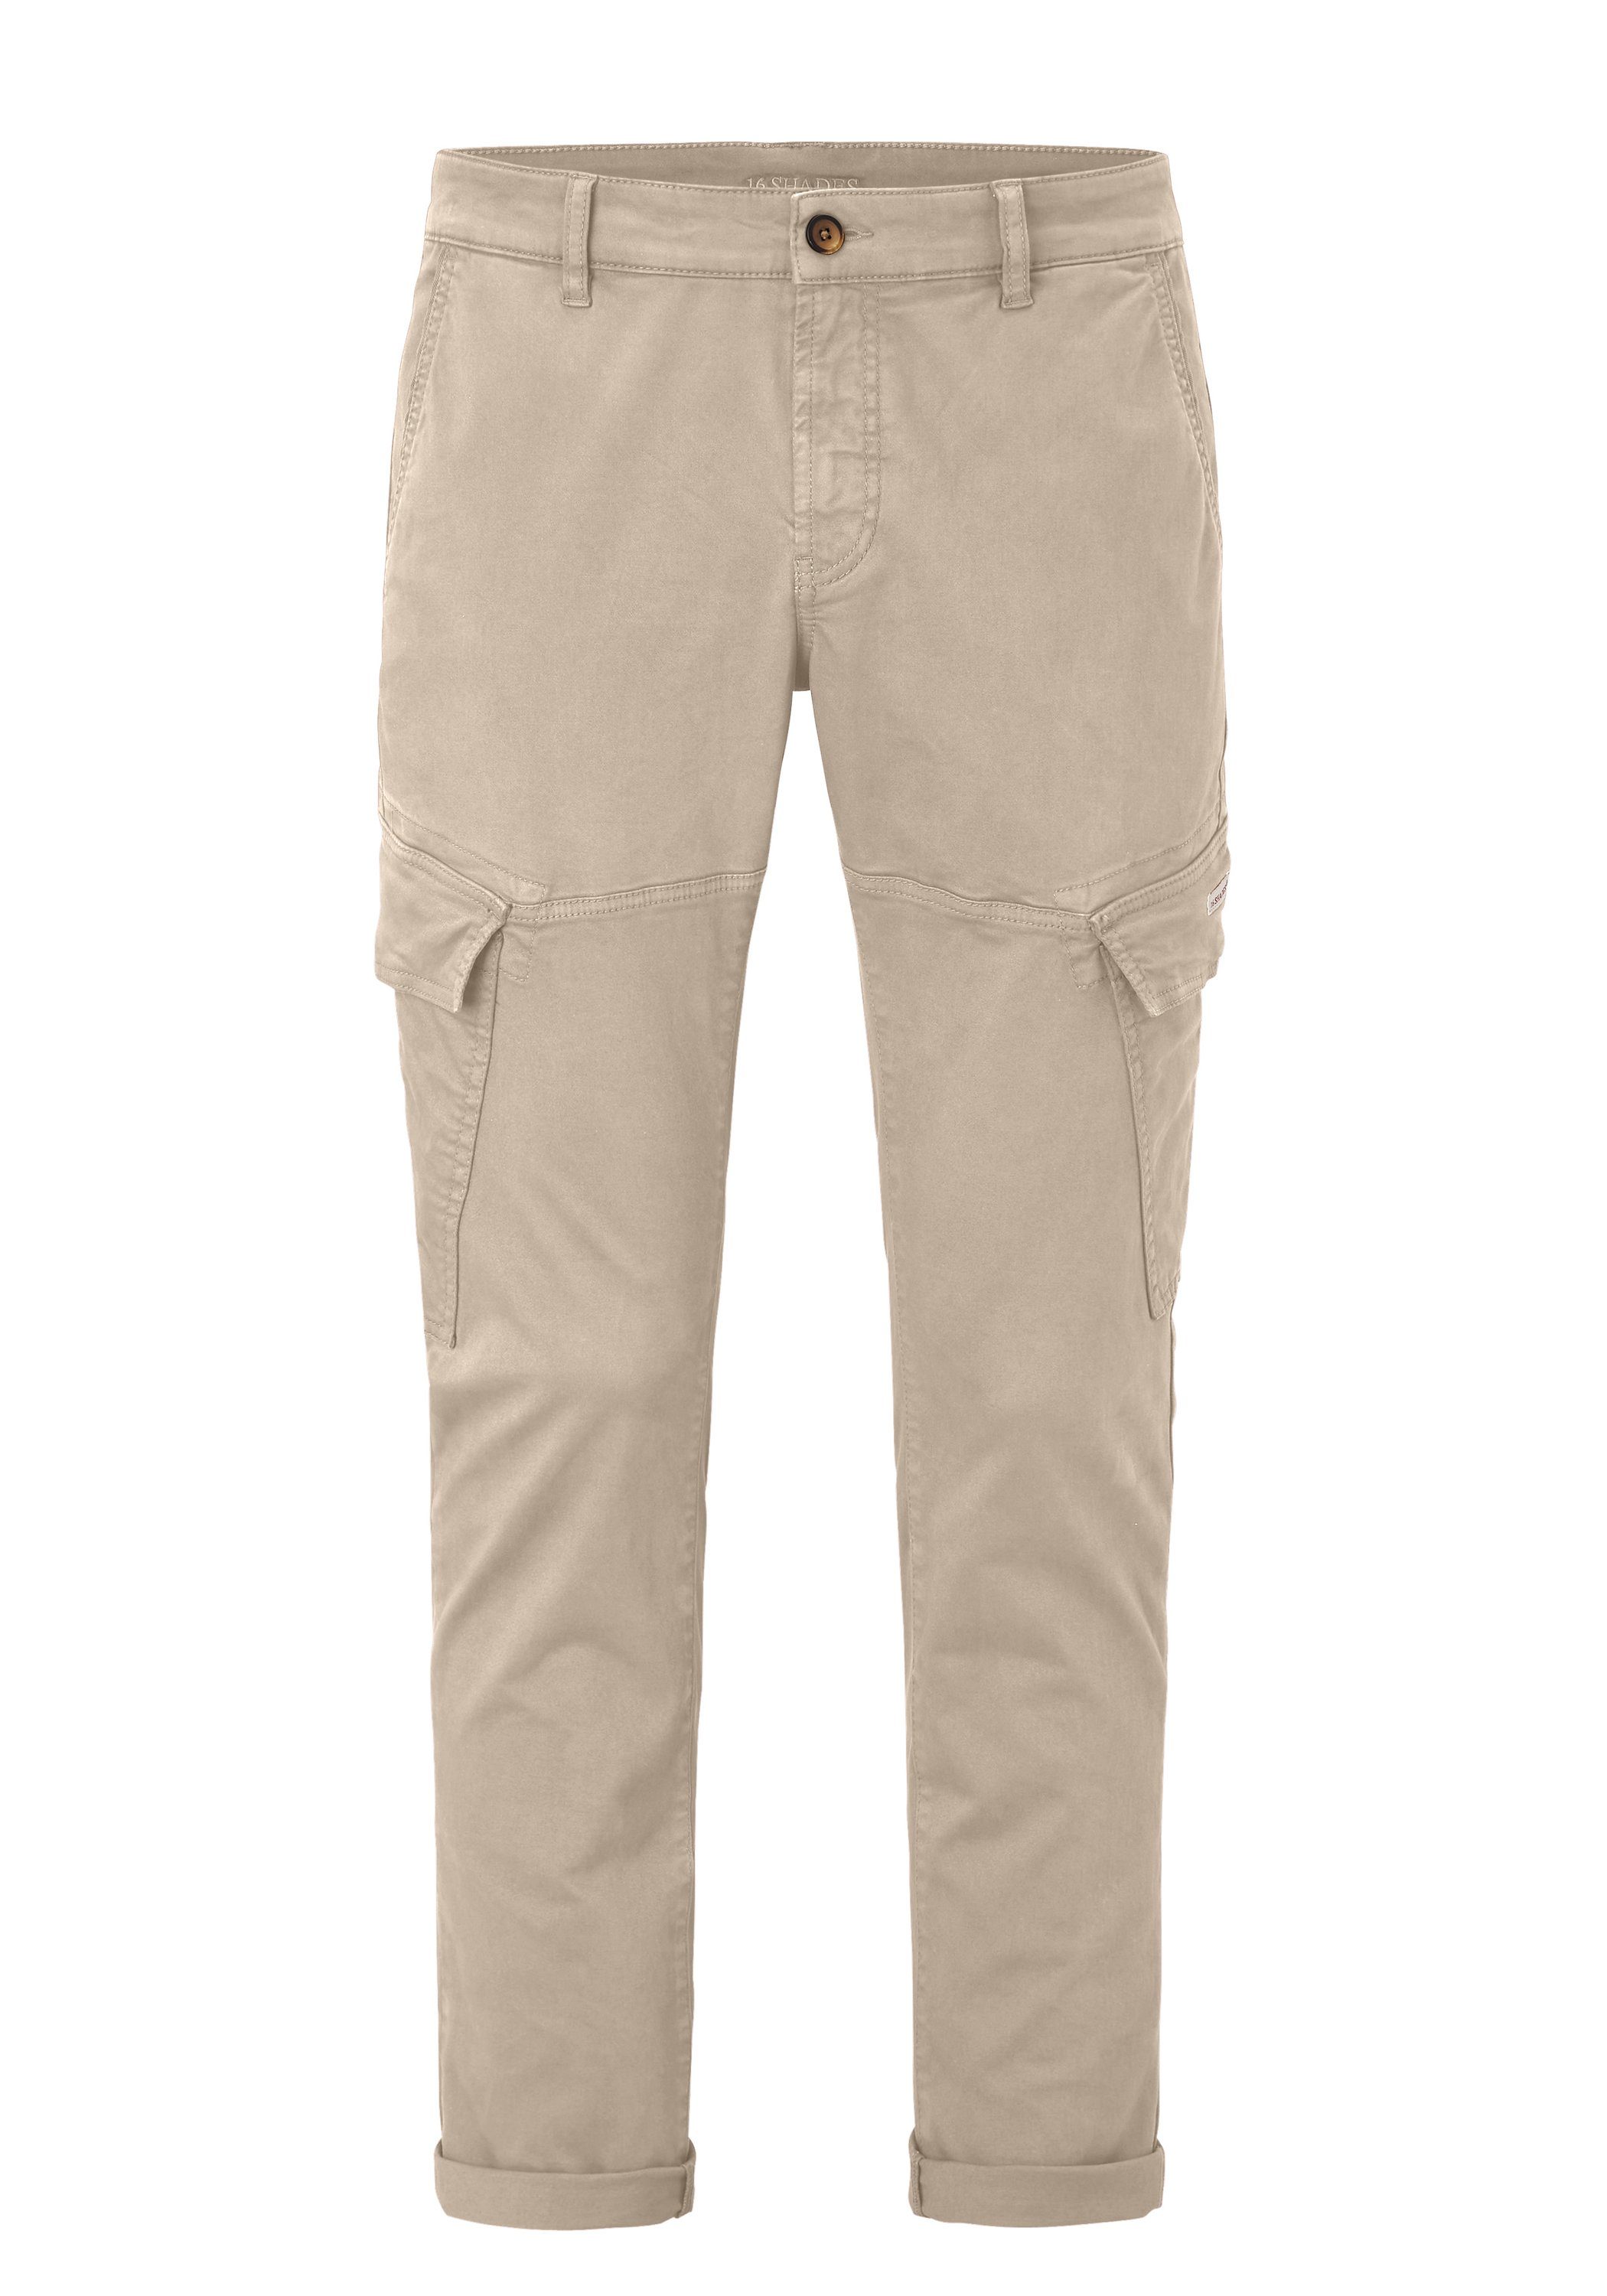 Edition Kingston Cargohose 16 Tapered Shades Fit Chinohose- Redpoint beige